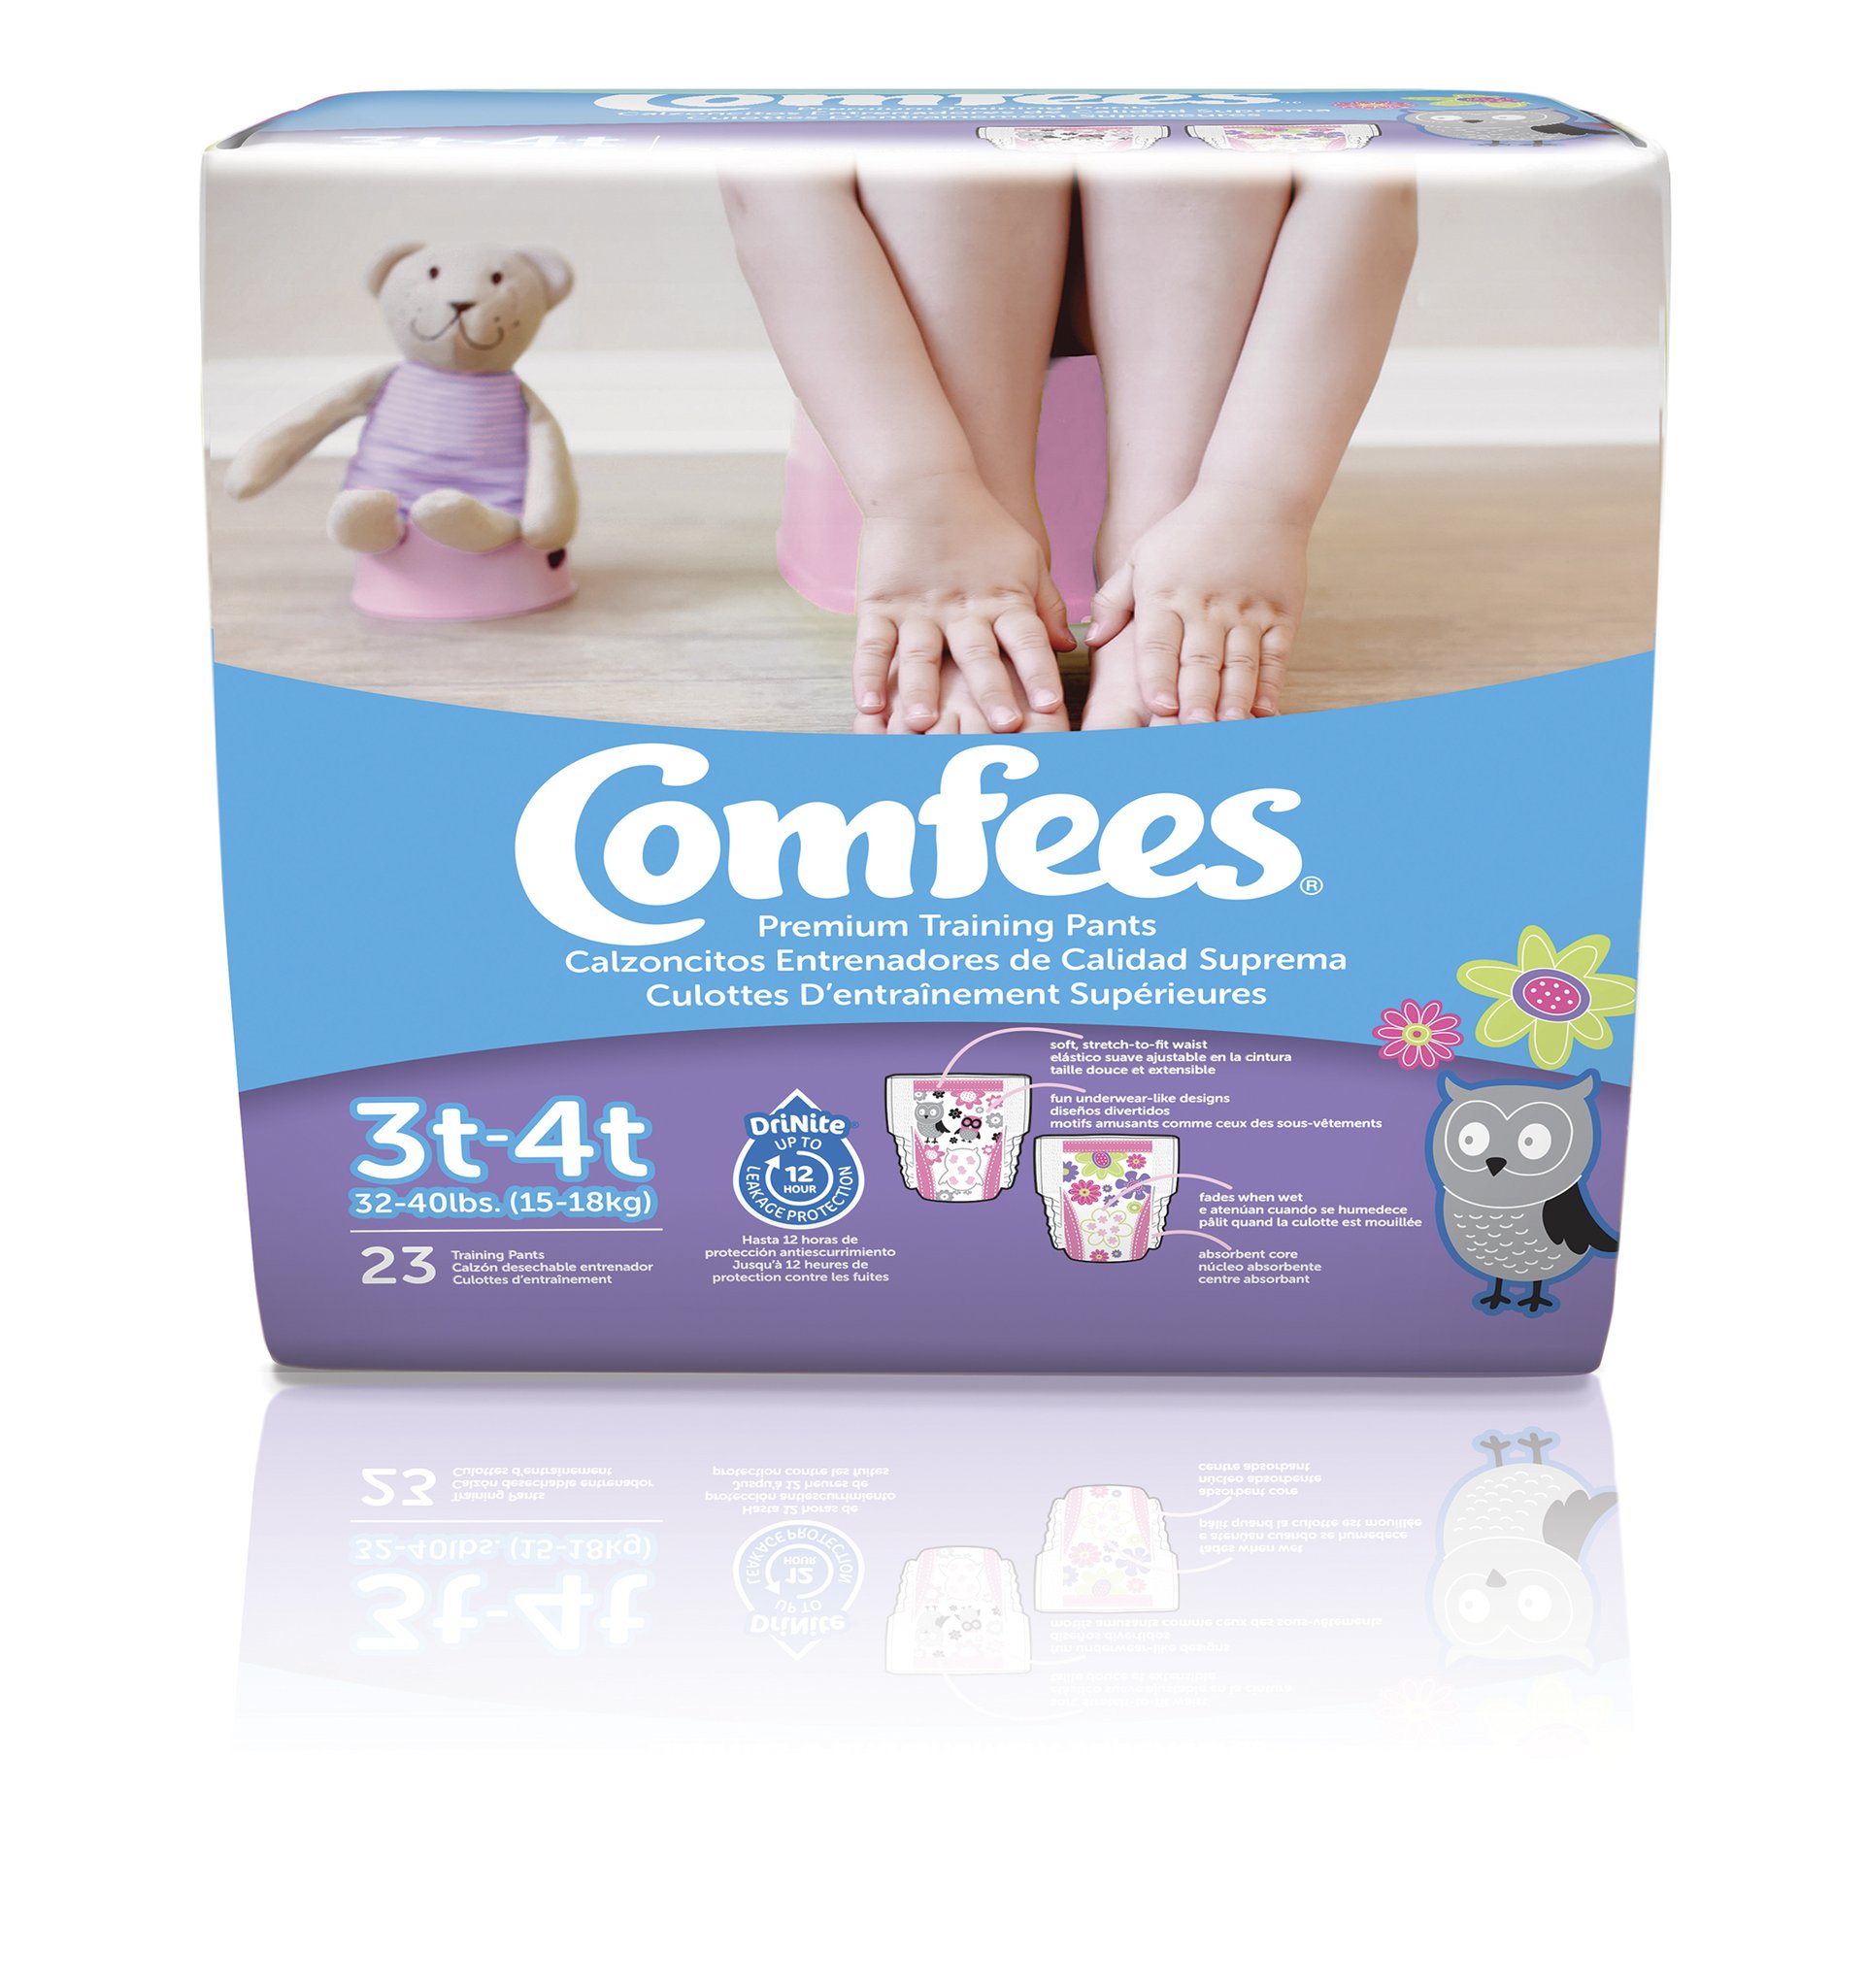 Buy Potty Training Diapers, Comfees Training Pants - Size 3T-4T-Girls